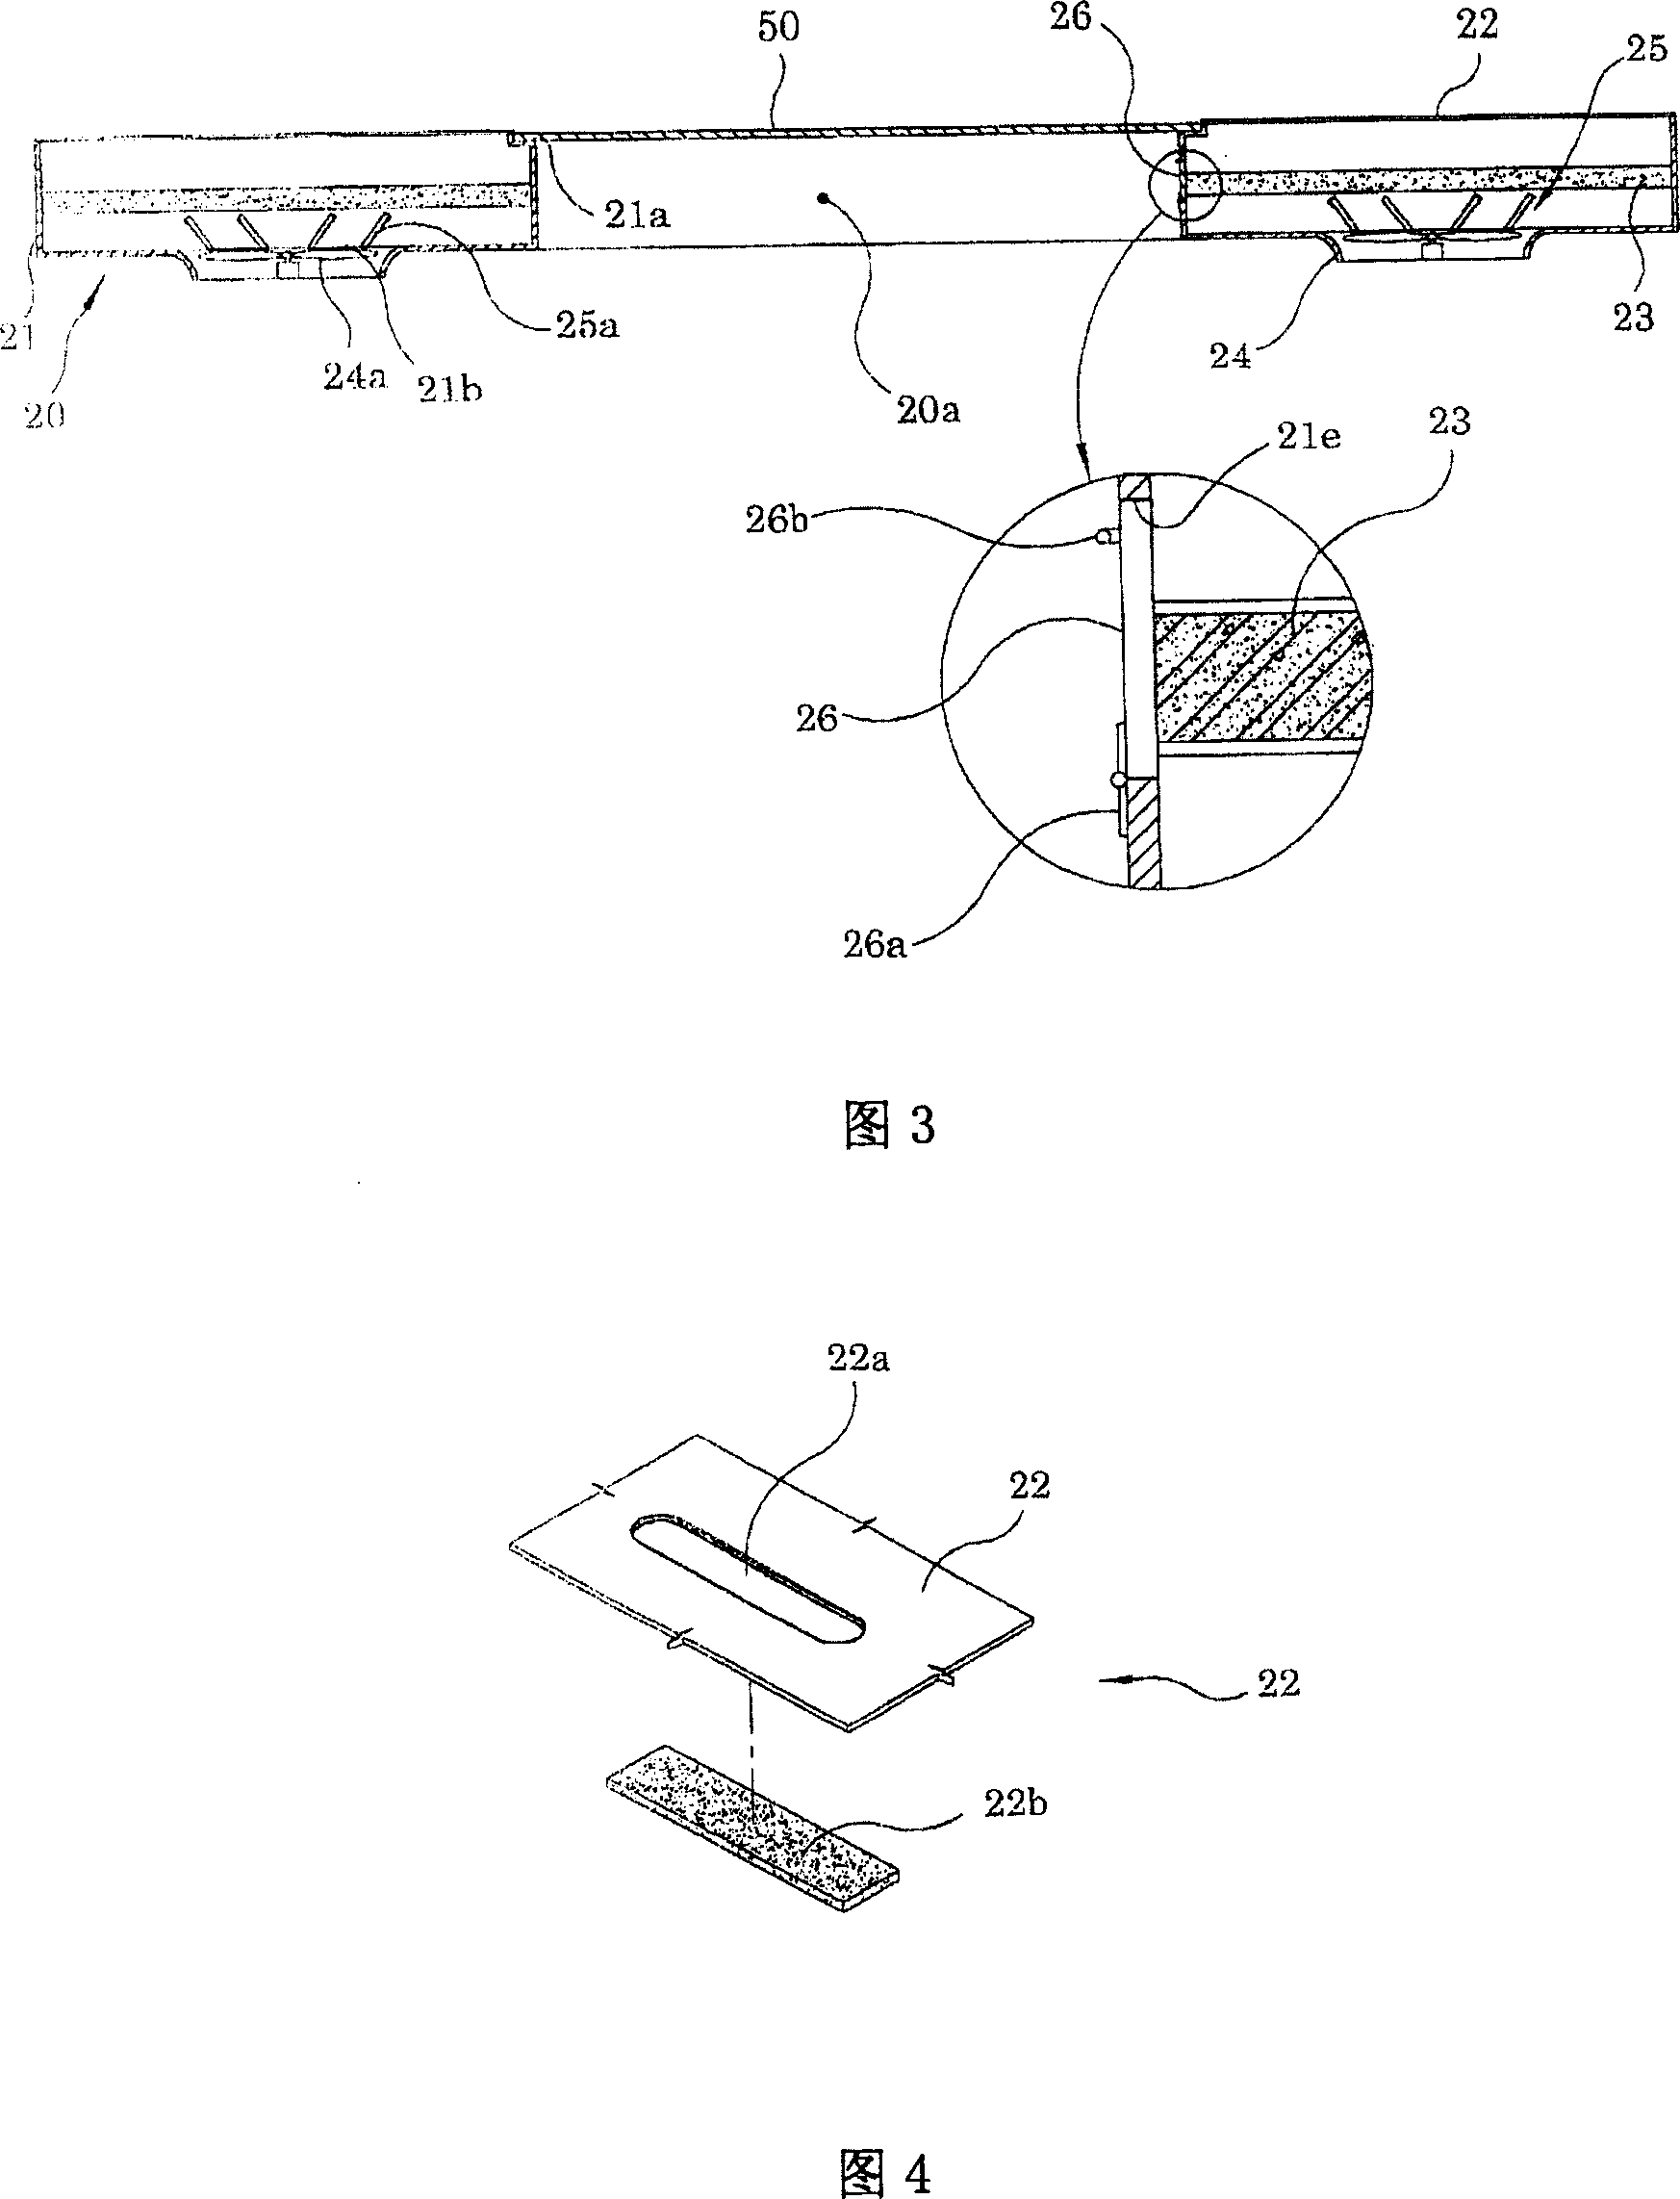 Apparatus for transferring of glass panel